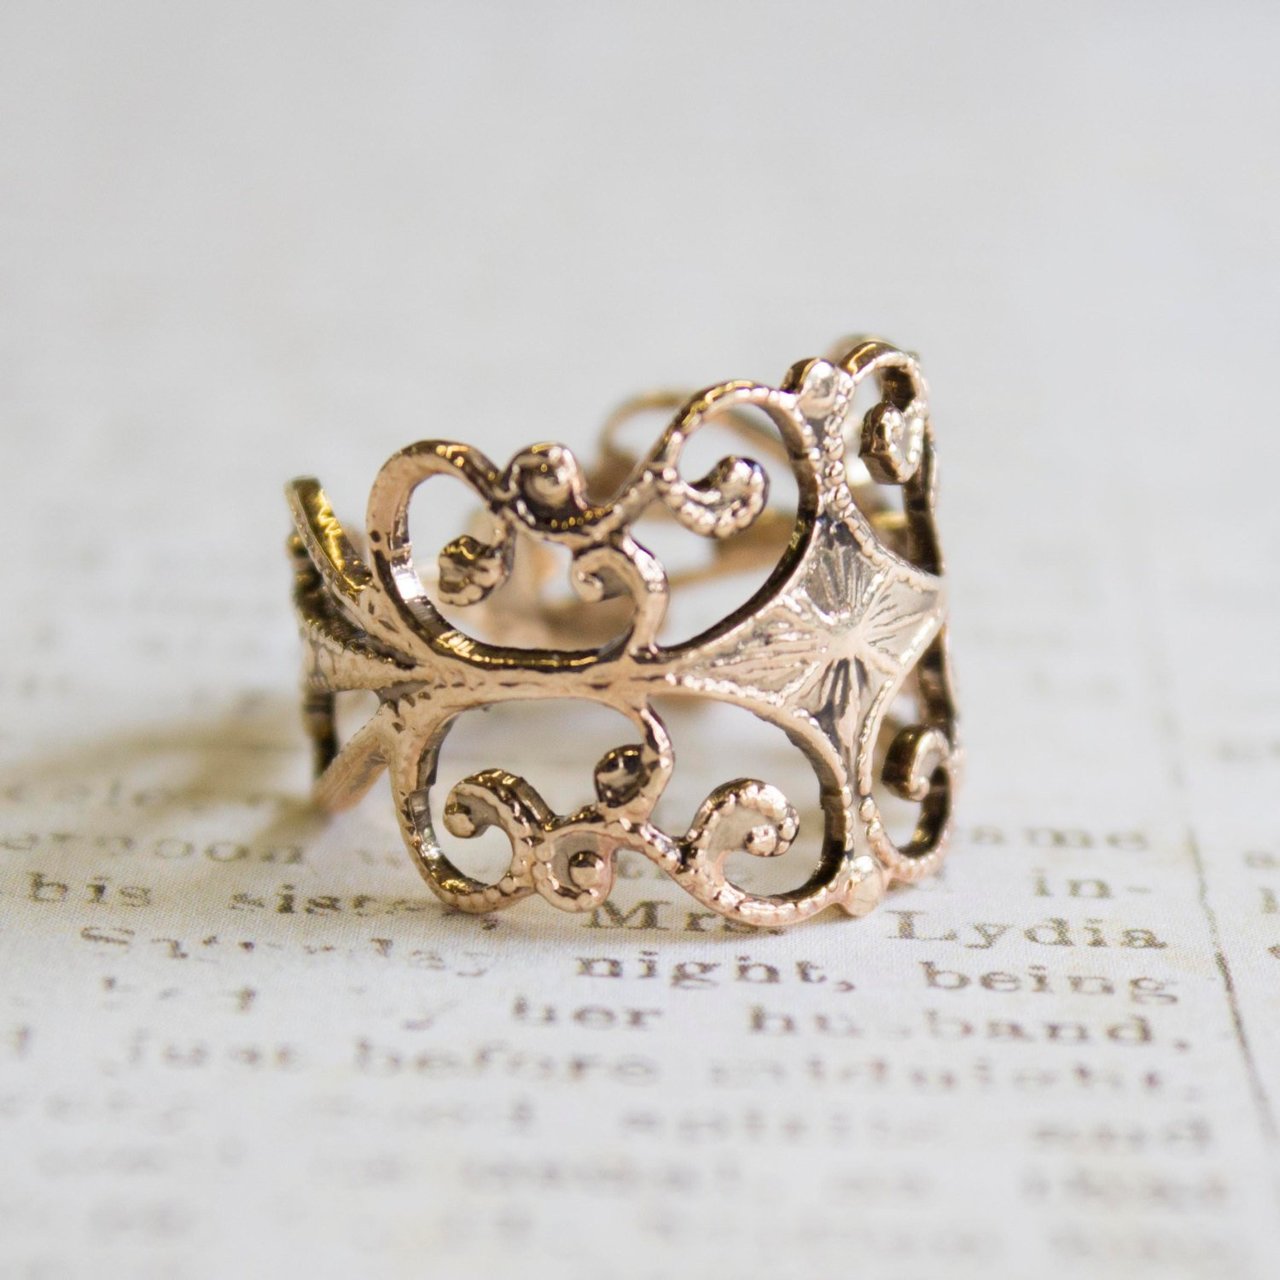 Vintage Ring Filigree Ring Antique 18k Gold Edwardian Style Womans Ornate Handmade Jewelry #R553 Size: 4